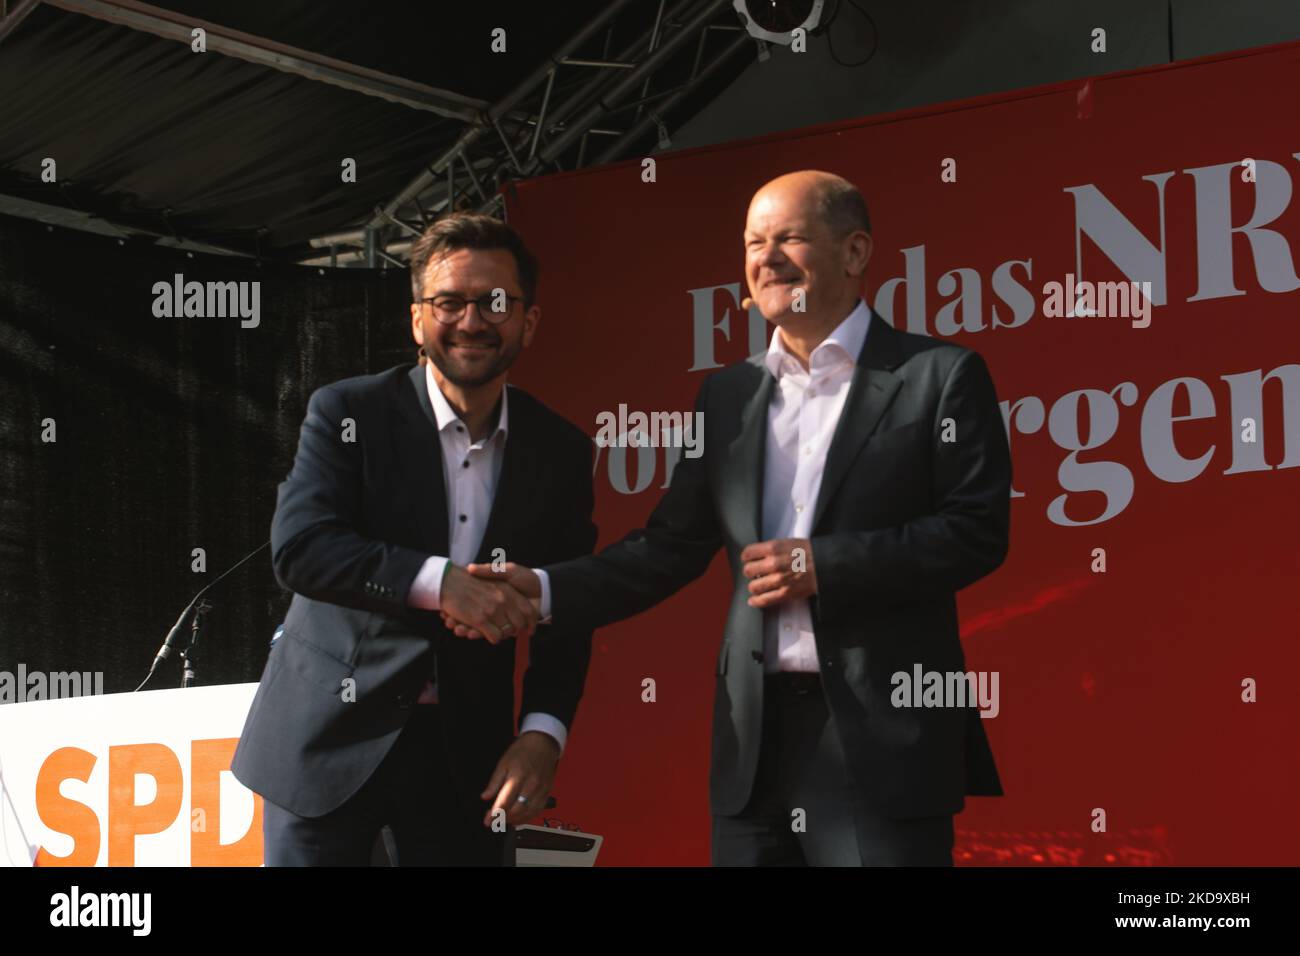 Olaf Scholz, Chancellor of Germany,shakes hands with Thomas Kutschaty, the top candidate from SPD party on the stage at Roncalliplatz in Cologne, Germany on May 13 during the SPD party state election campaign 2022 (Photo by Ying Tang/NurPhoto) Stock Photo